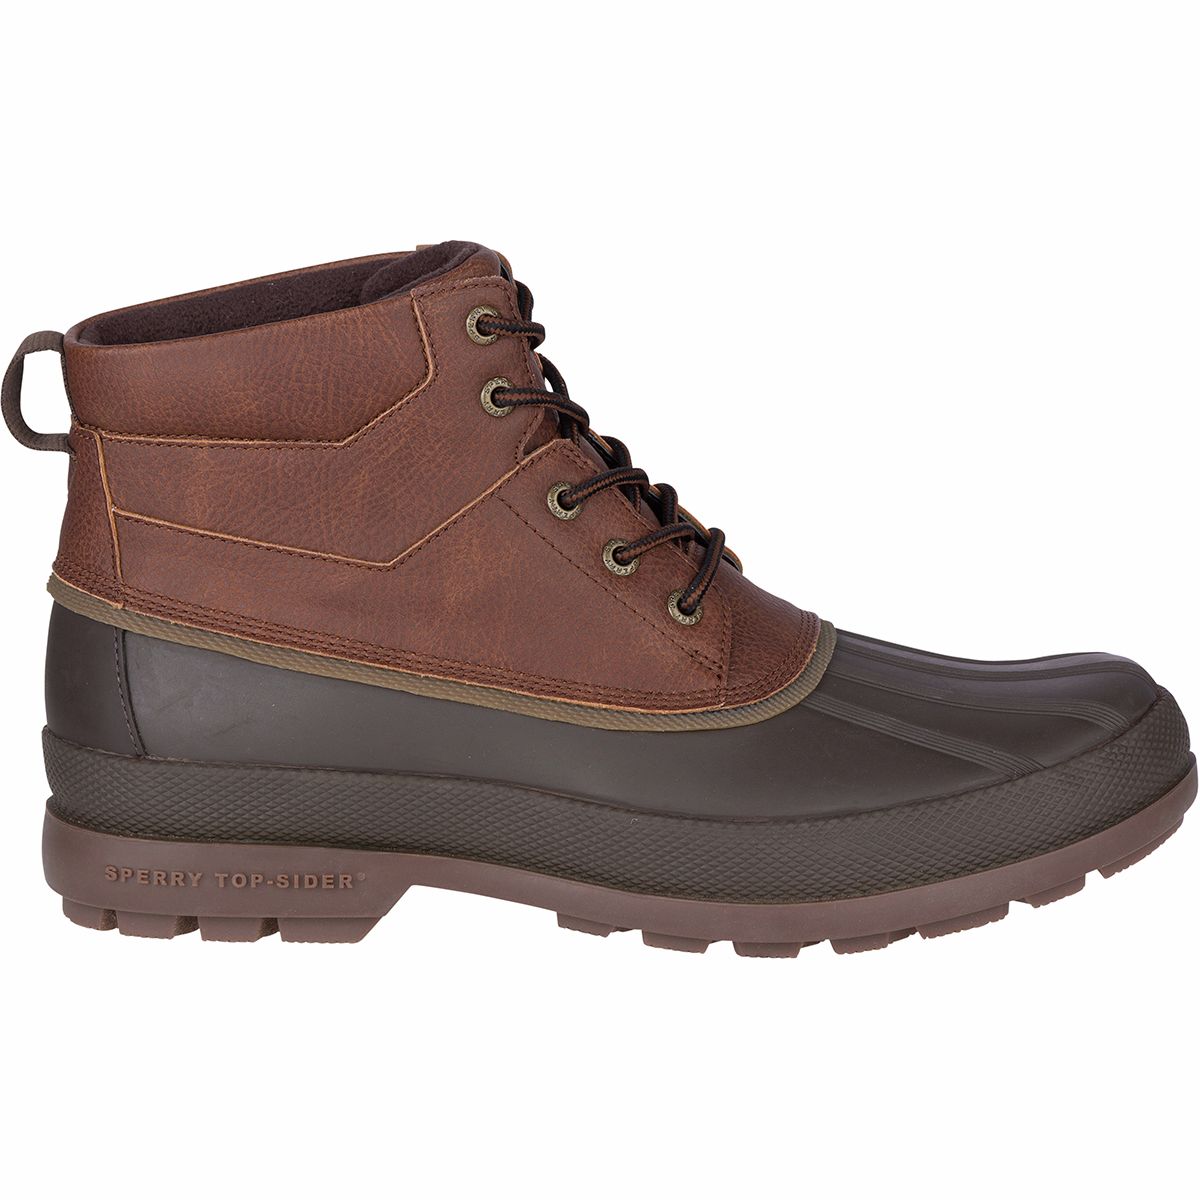 Sperry Top-Sider Cold Bay Chukka Boot - Men's product image